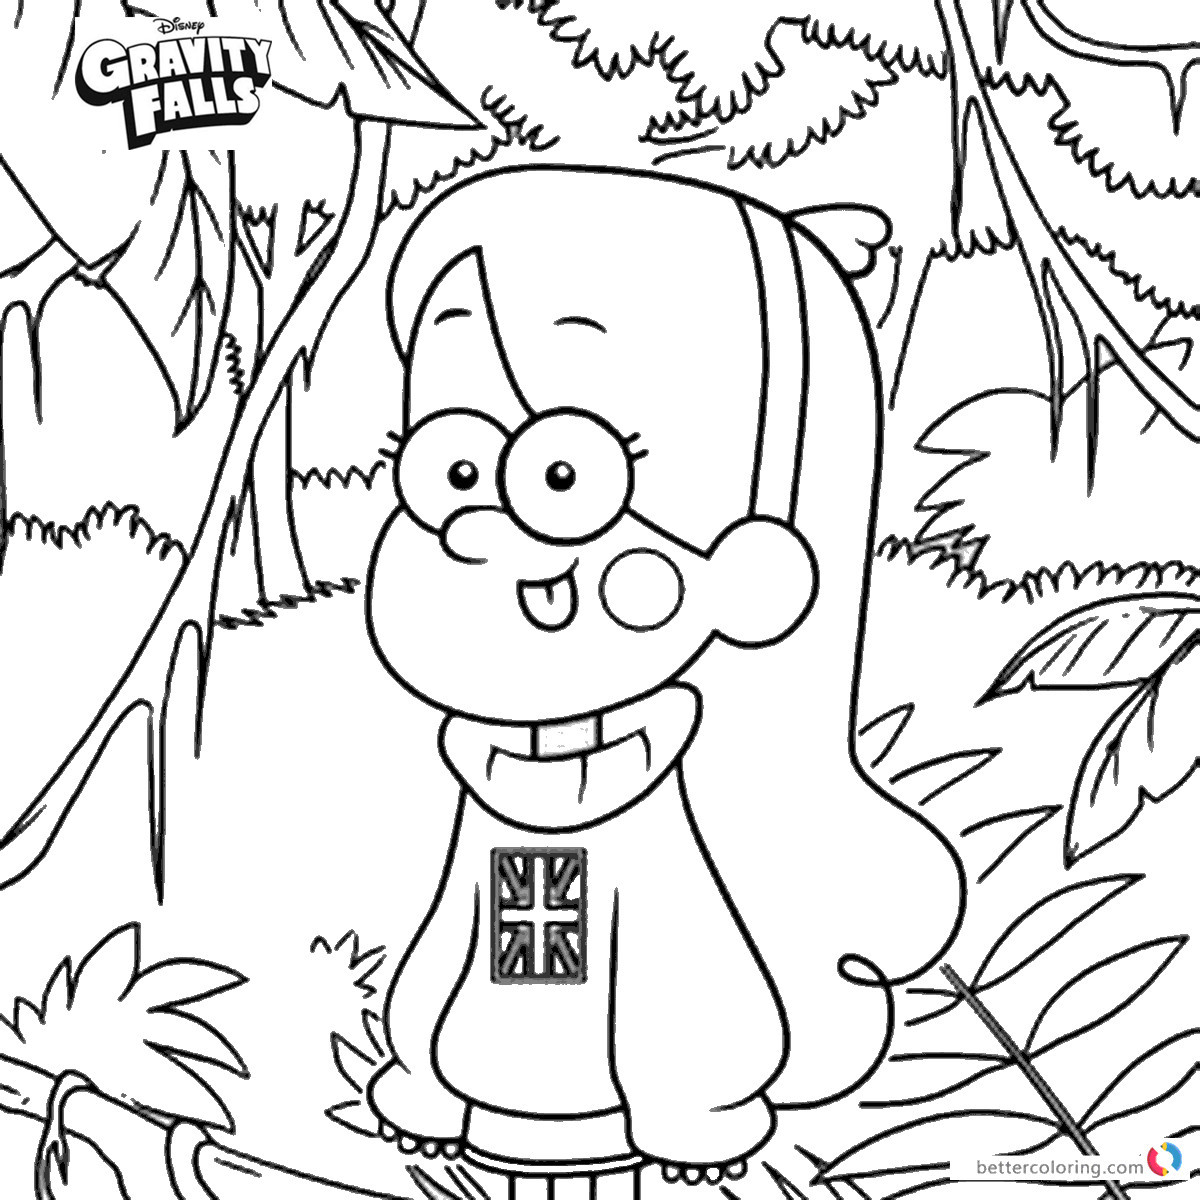 Gravity falls coloring pages Mabel in Woods - Free Printable Coloring Pages